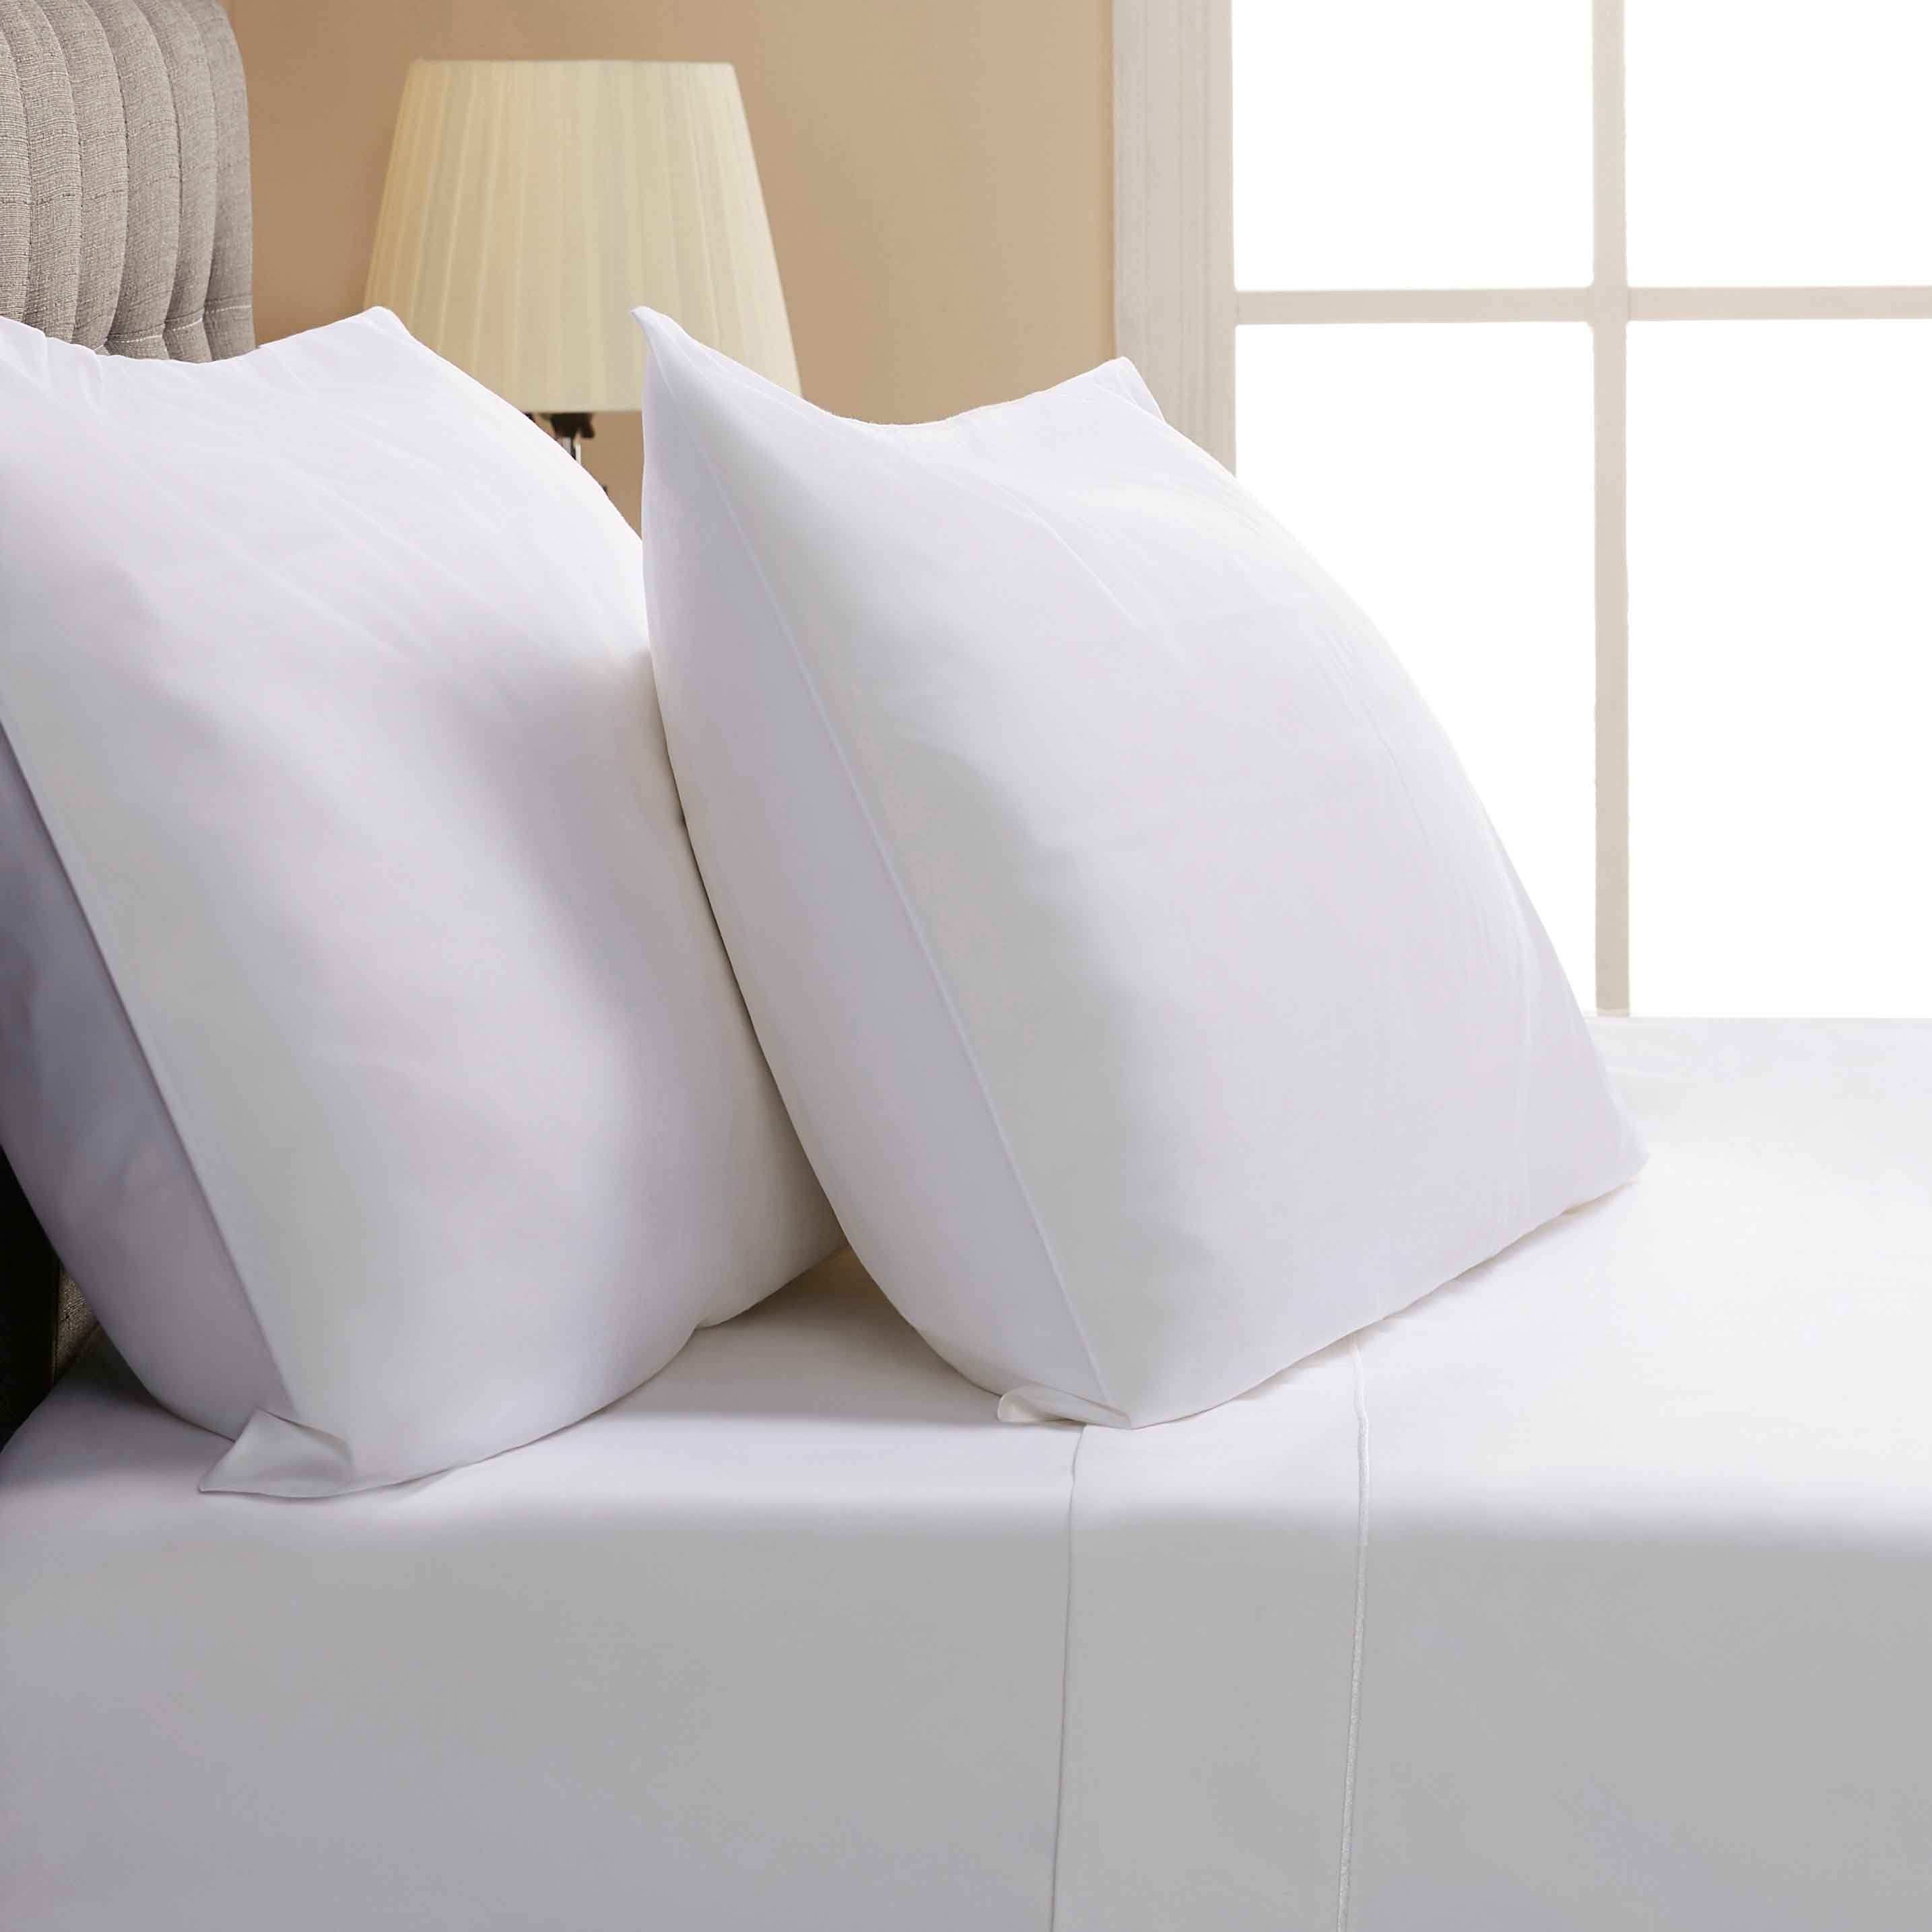 Pillow Case Queen Size Egyptian Cotton 1000 TC White Solid  @ US 